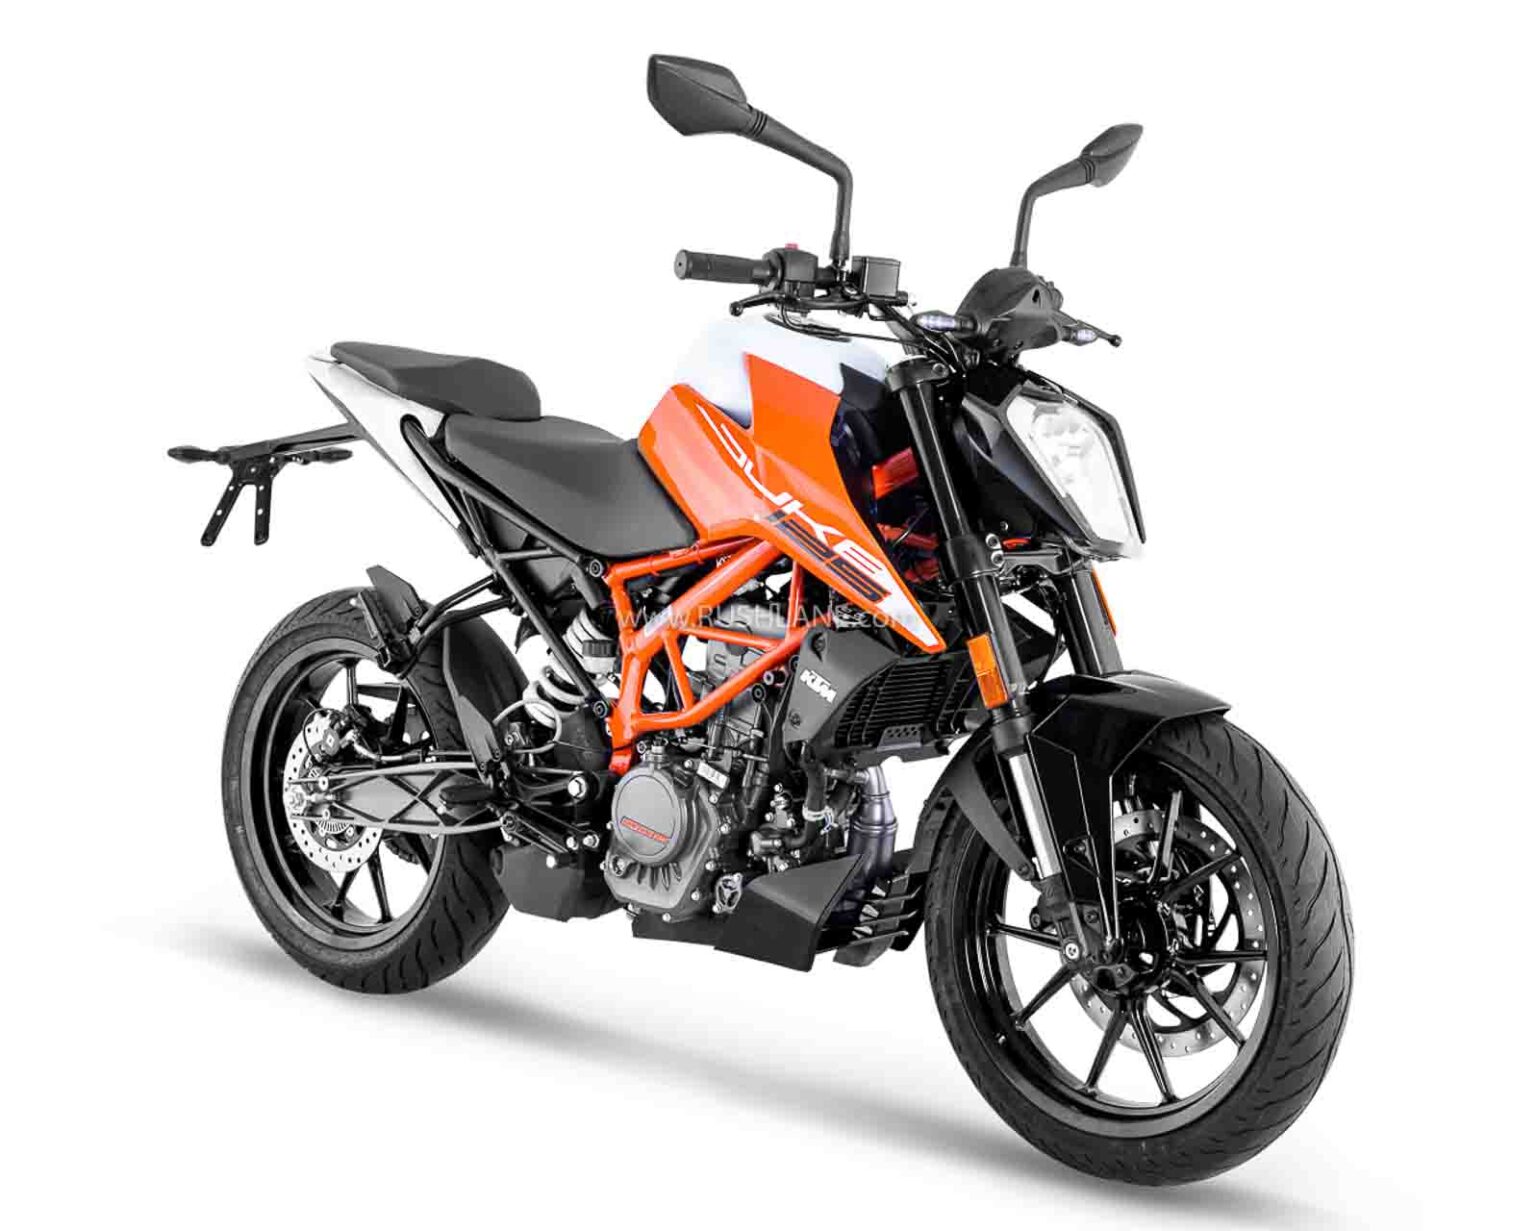 New KTM Duke 125 Launch Price Rs 1.5 Lakh First Look Walkaround